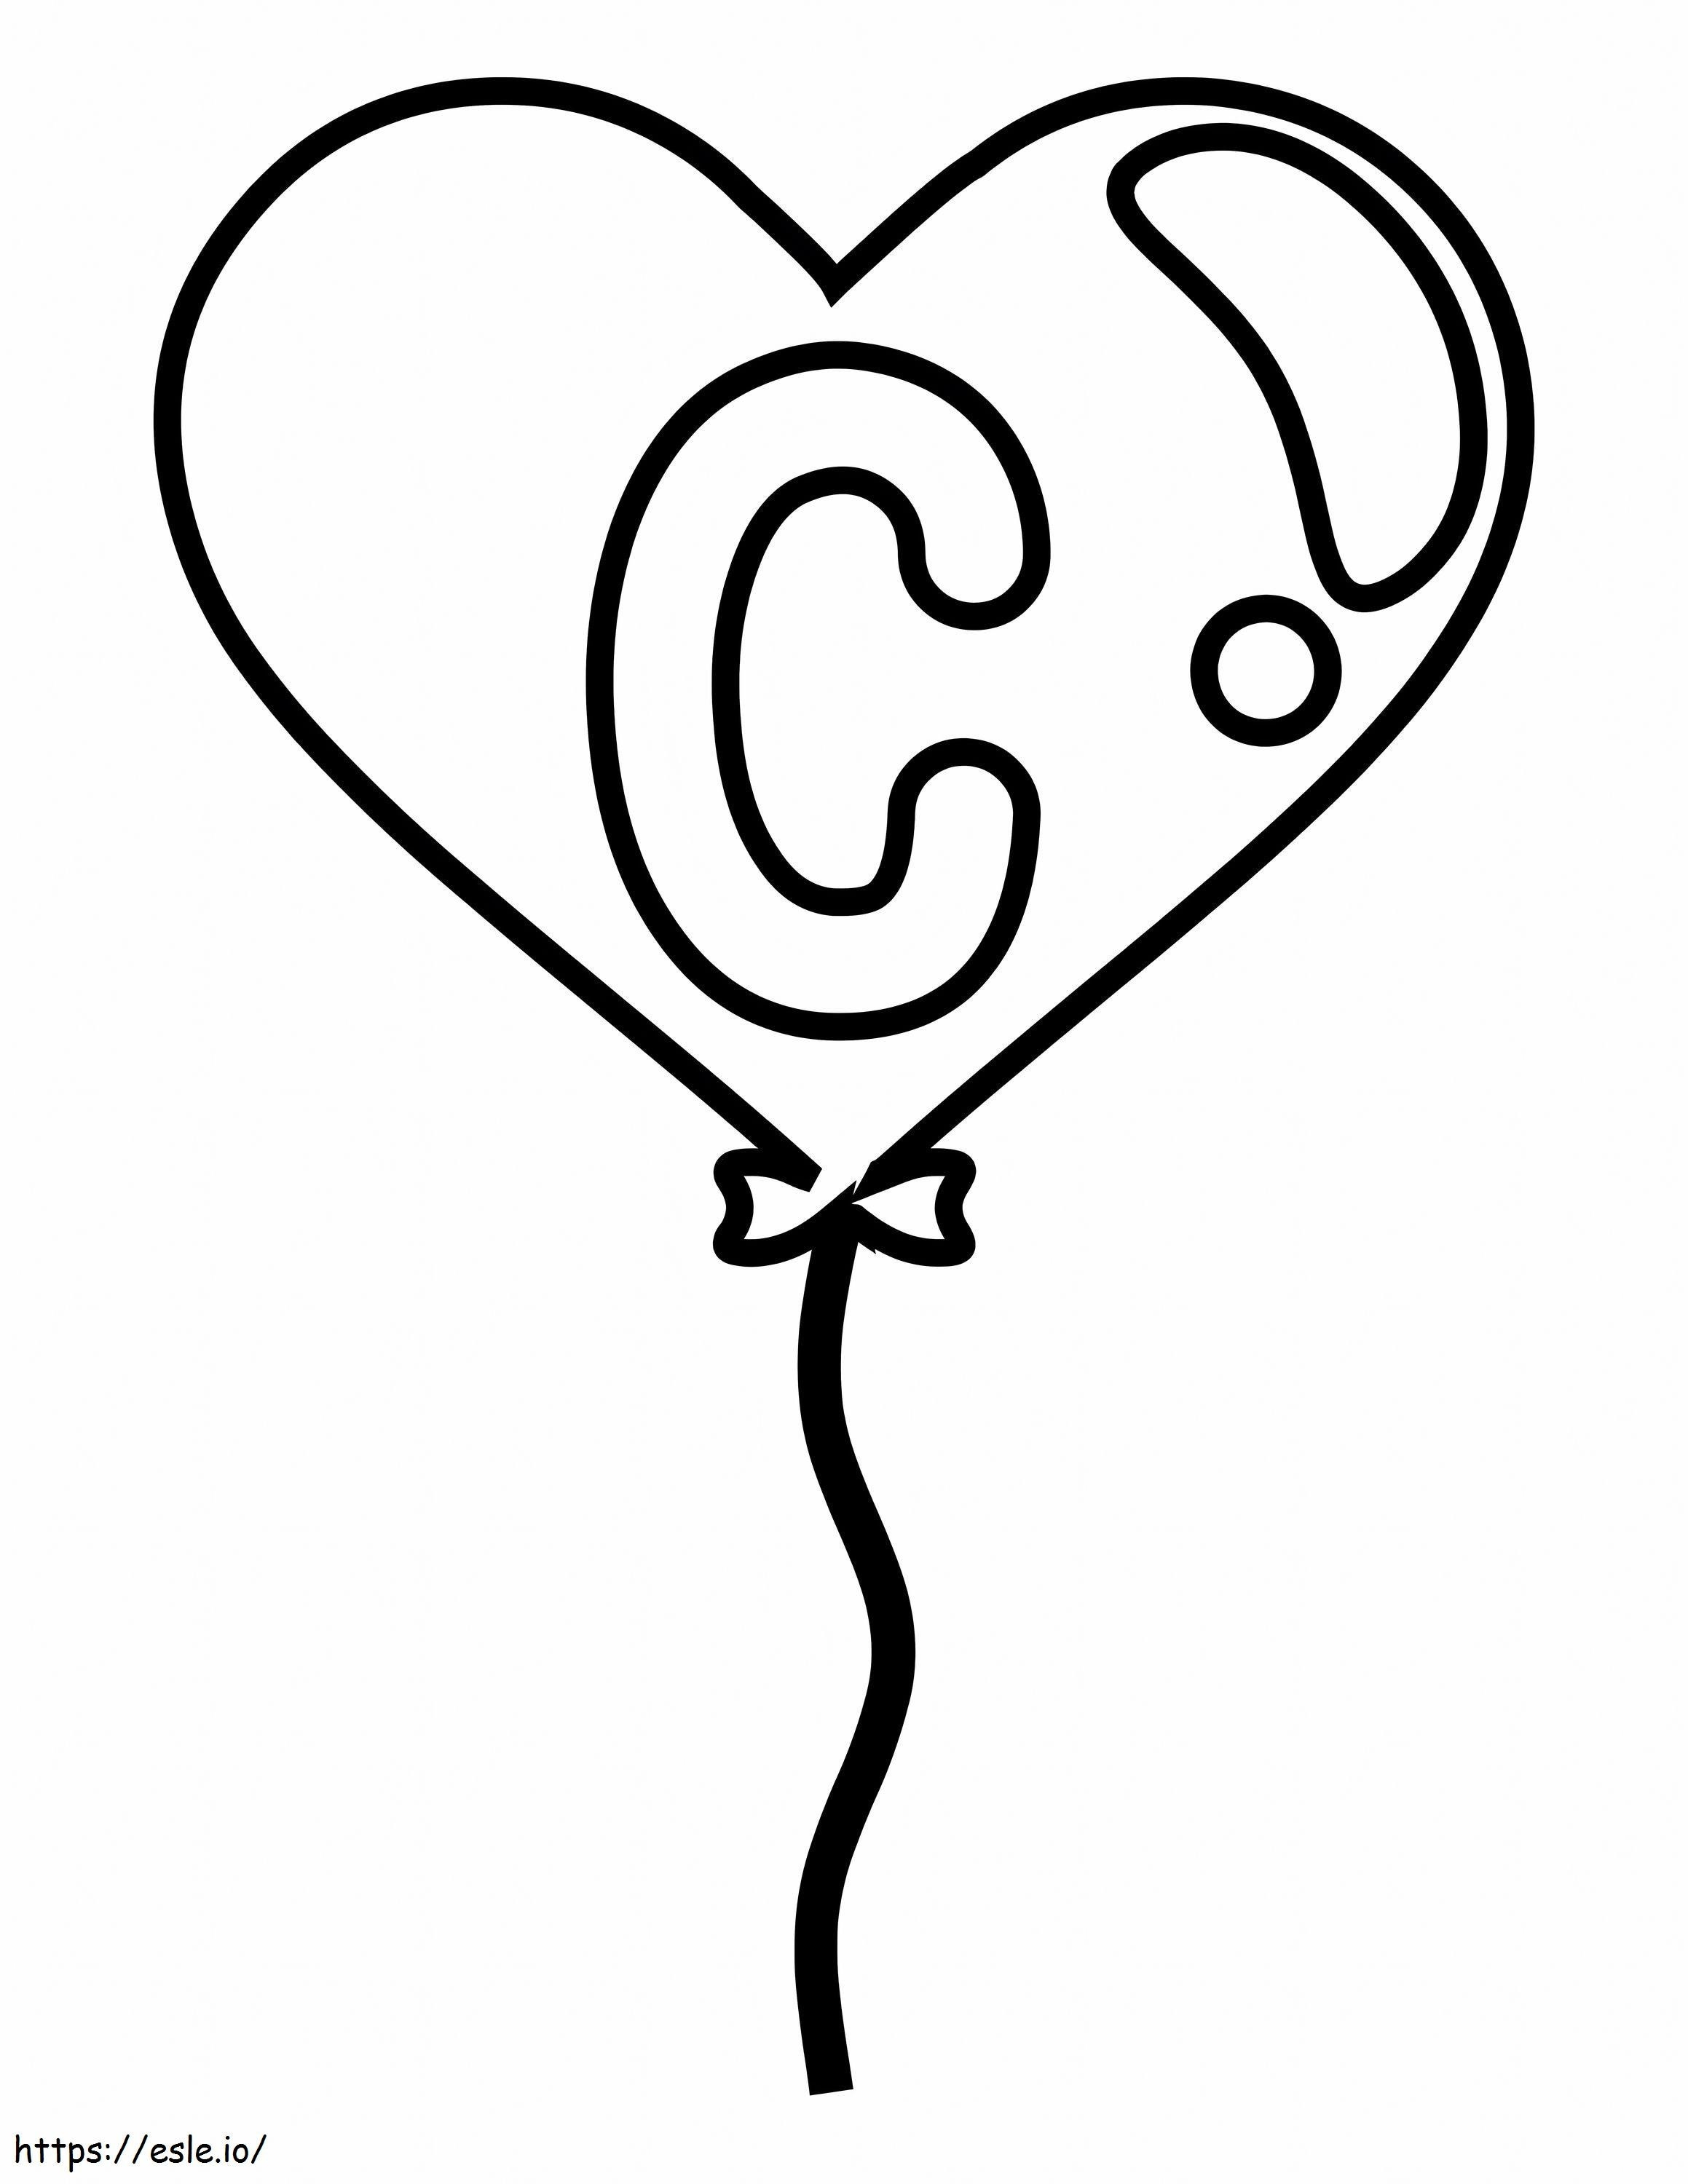 Letter C Easy In Heart Balloon coloring page